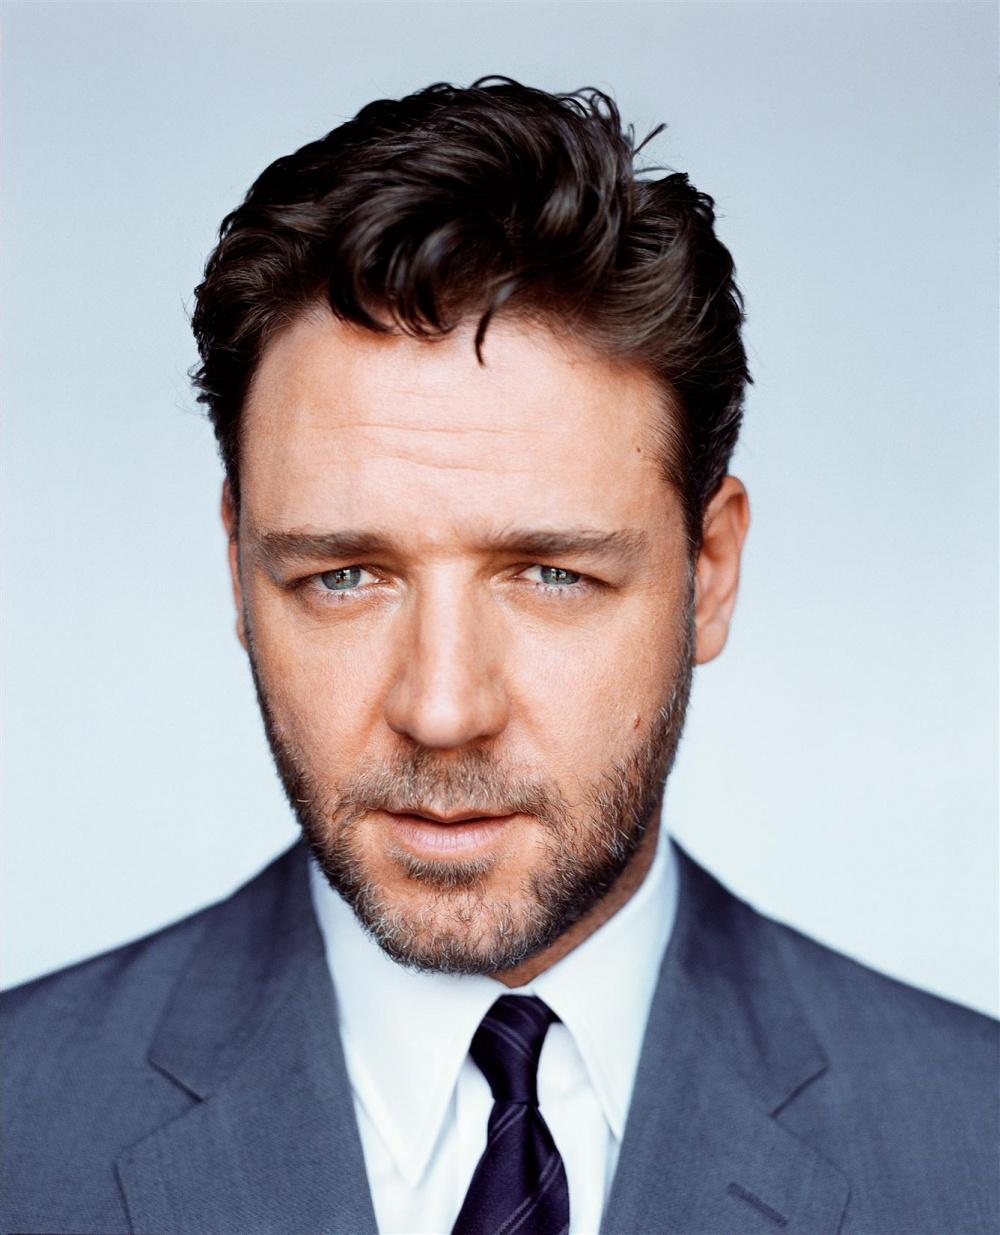 Photo №3956 Russell Crowe.